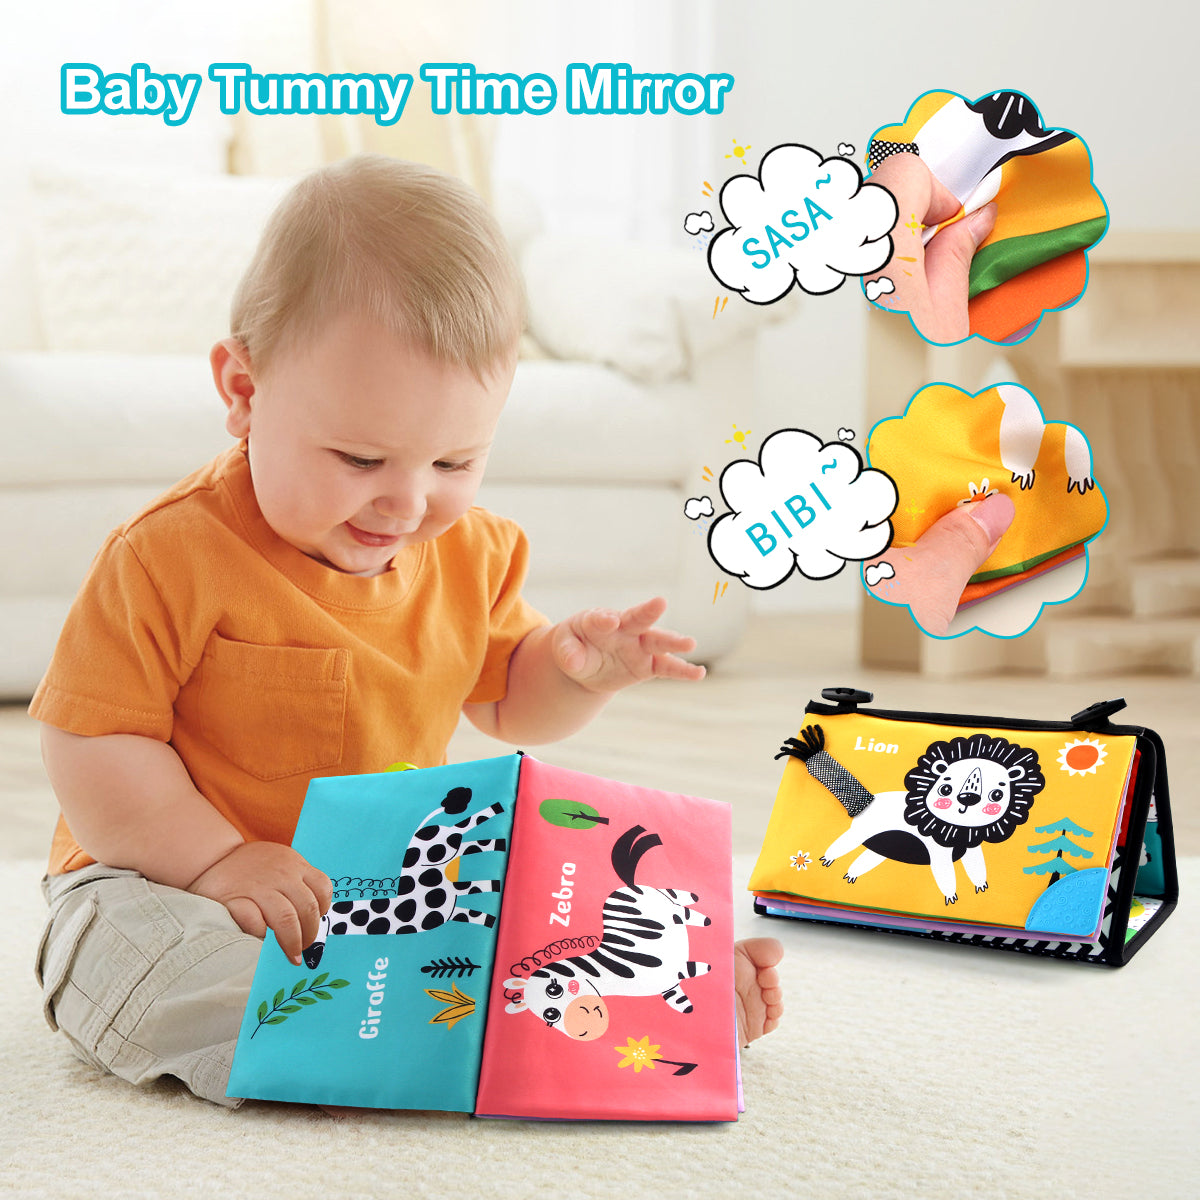 Joyfia Tummy Time Floor Mirror, High Contrast Baby Book, Soft Crinkle Cloth Book with Teethers, Activity Sensory Developmental Gift Toys for Infants Newborn Boys Girls 0-12 Months